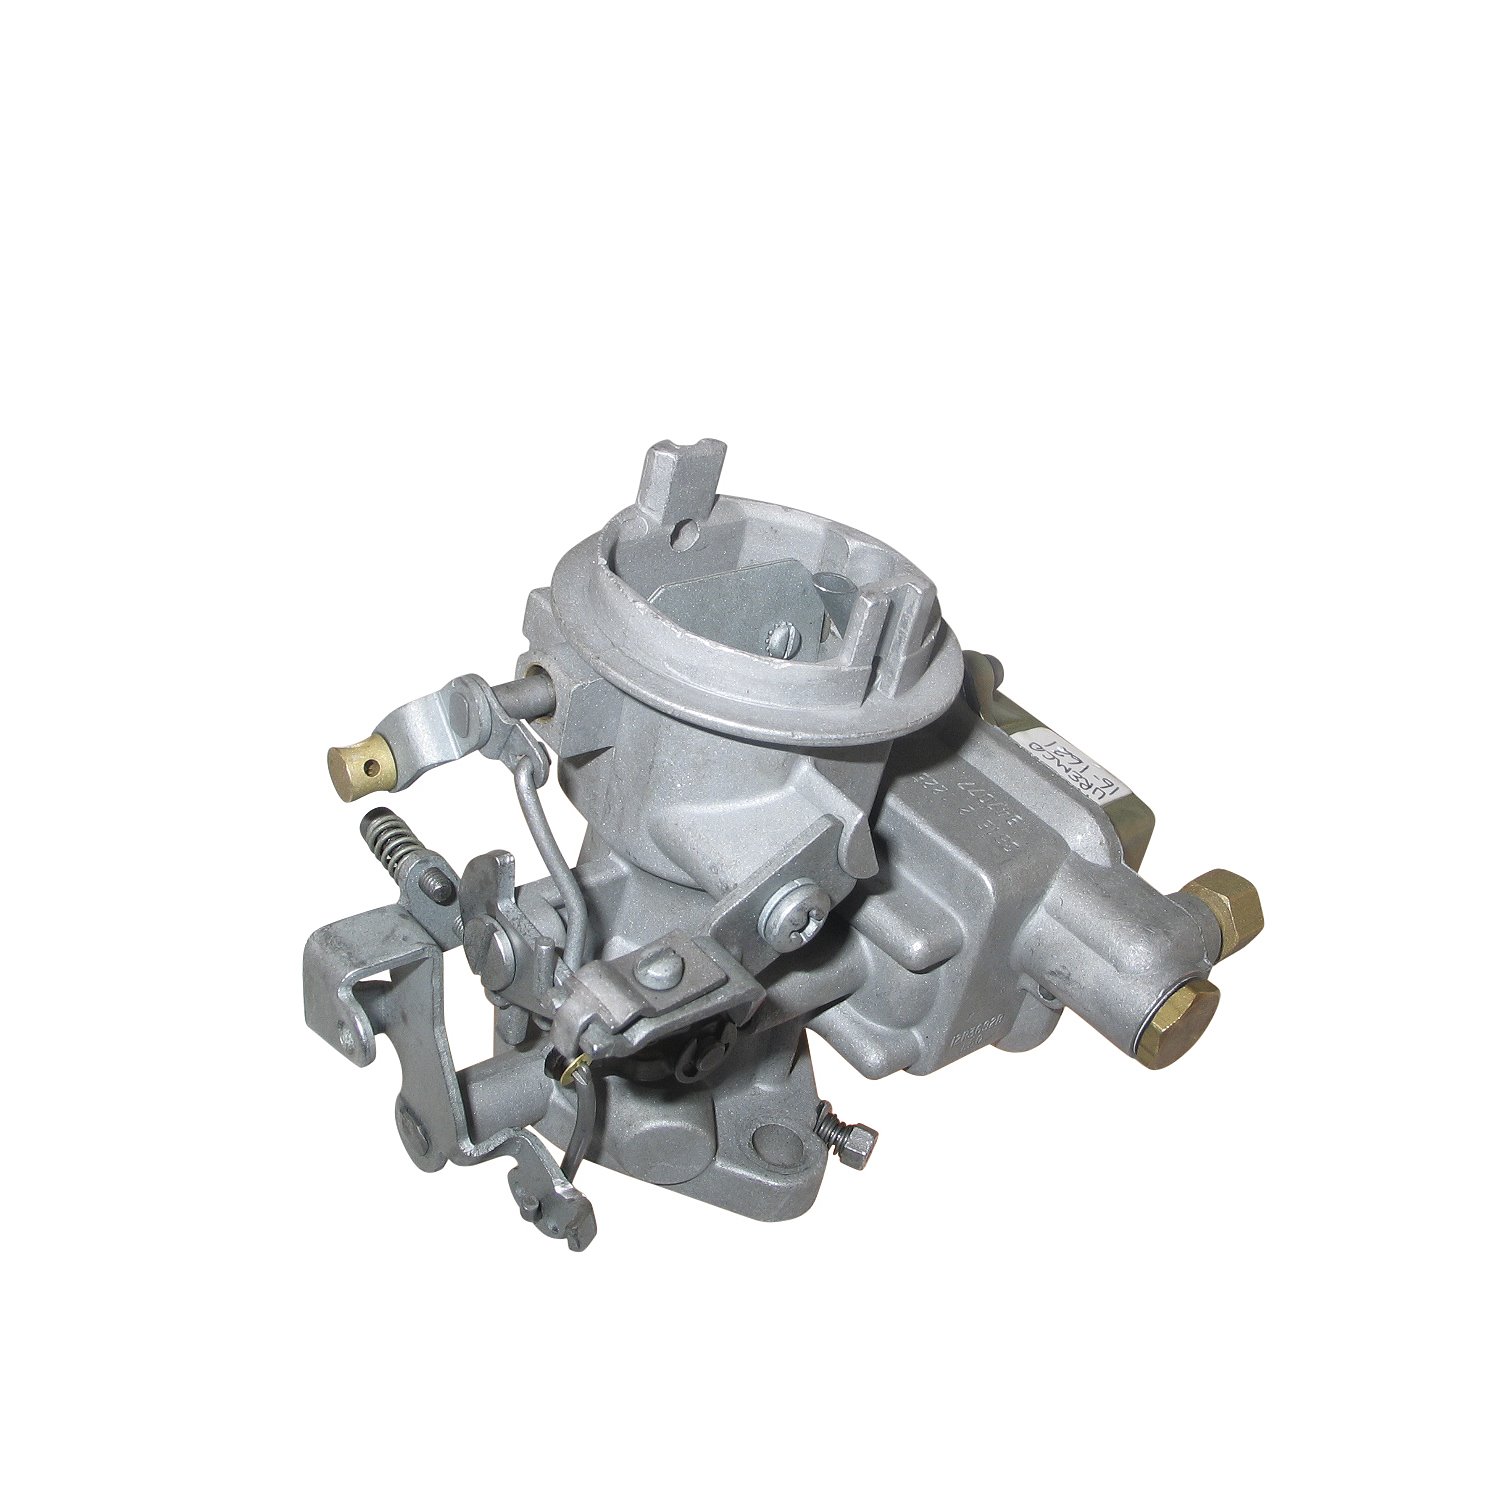 16-1621 Holley Remanufactured Carburetor, 1920-Style